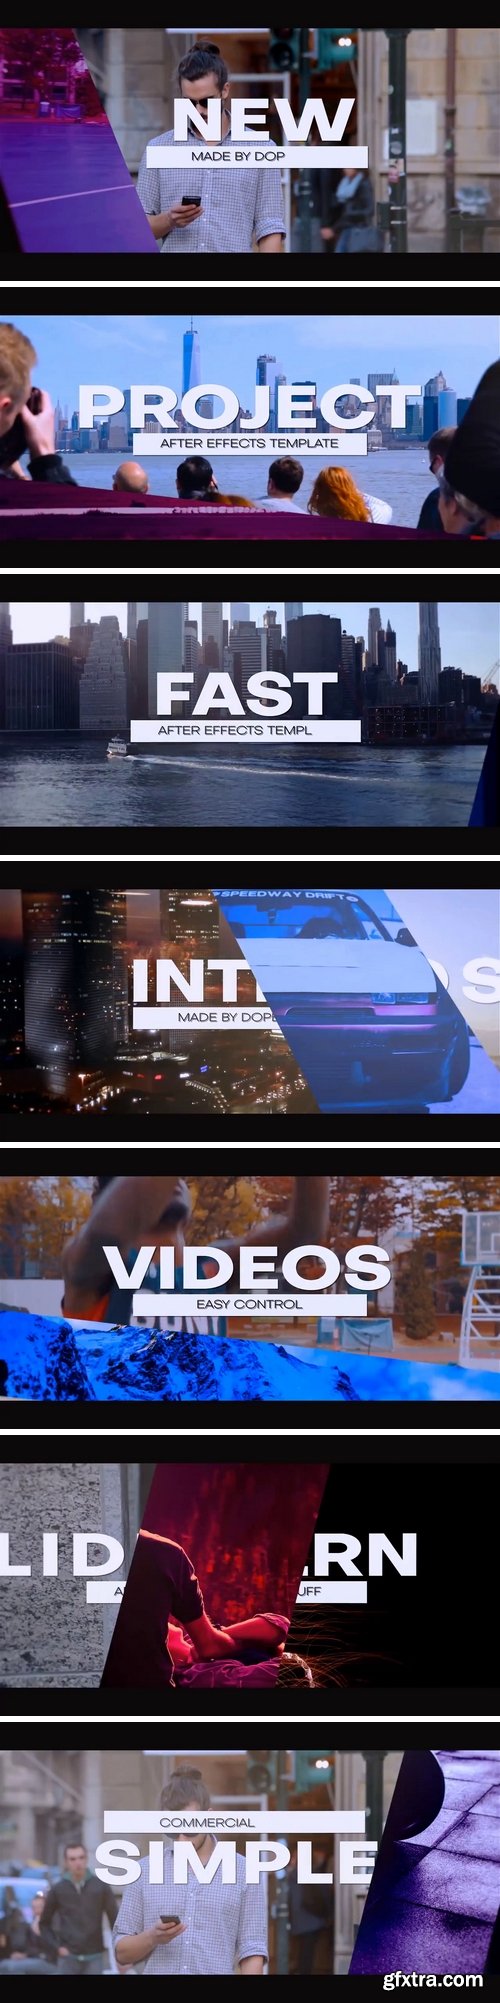 MA - Fast Intro After Effects Templates 152092